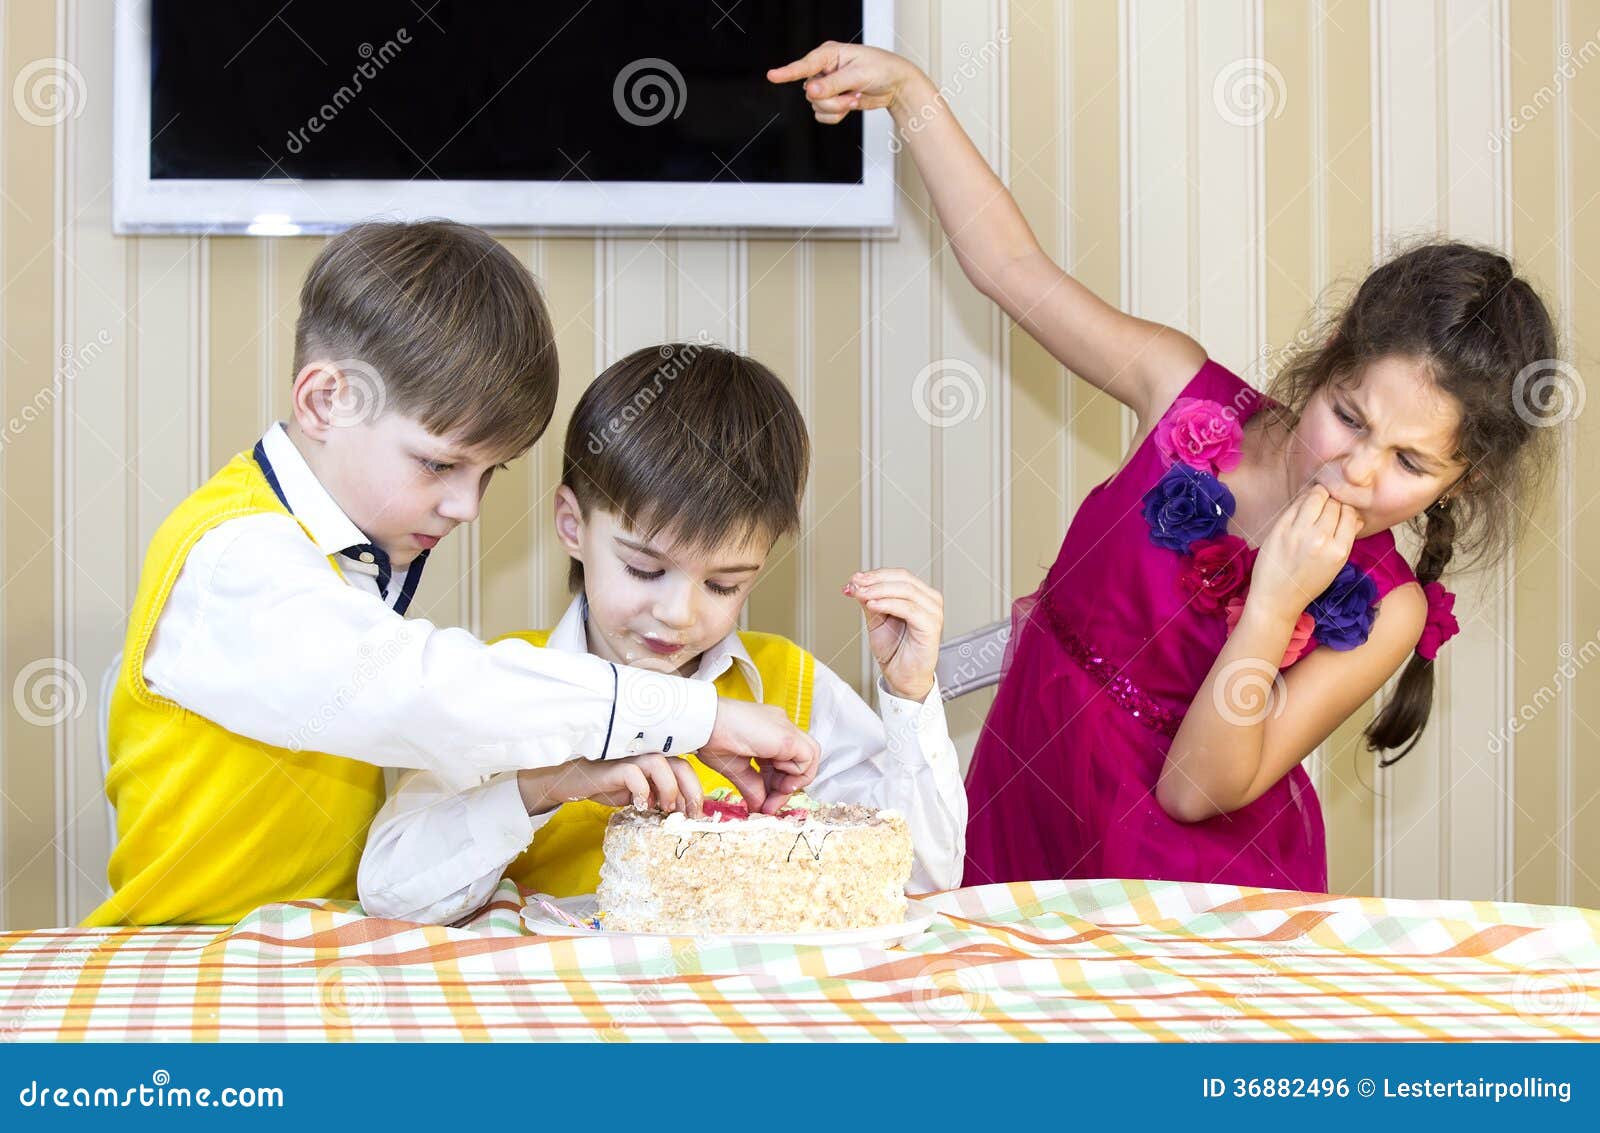 Kids eat cake stock photo. Image of meadow, expression - 36882496